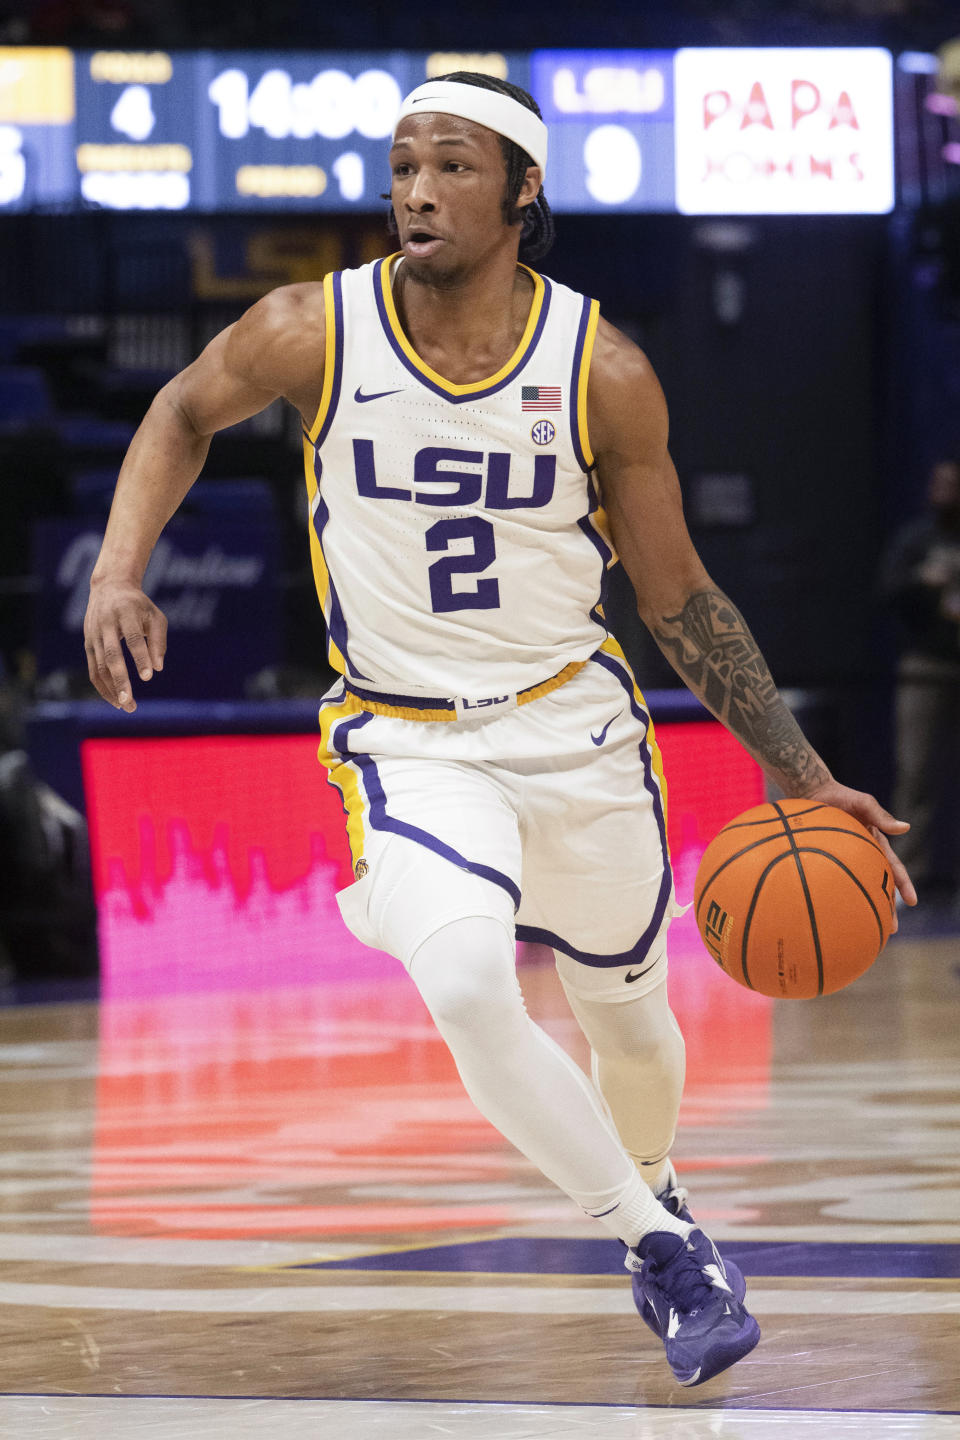 LSU guard Mike Williams III drives the ball down the court against Alabama State during an NCAA college basketball game on Wednesday, Dec. 13, 2023, in Baton Rouge, La. (Hilary Scheinuk/The Advocate via AP)